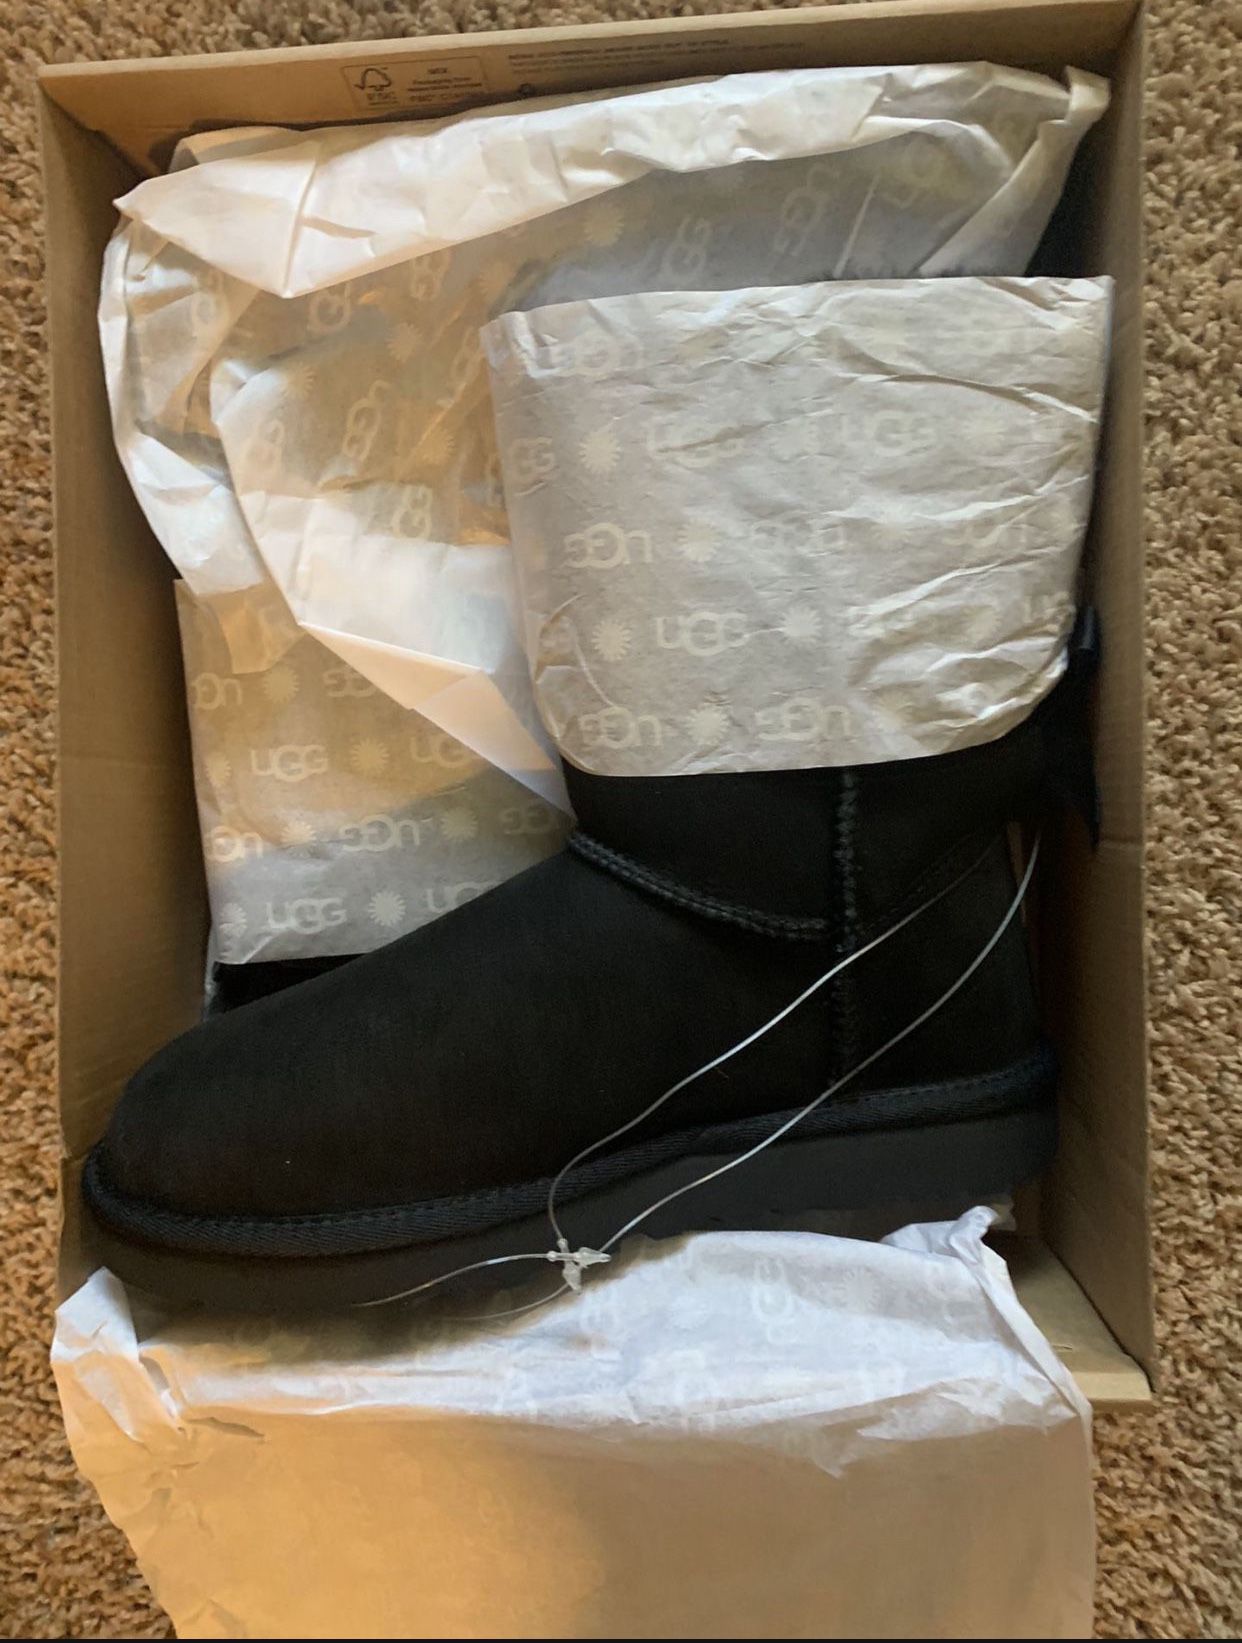 Ugg Boots Women’s Size 7 Black